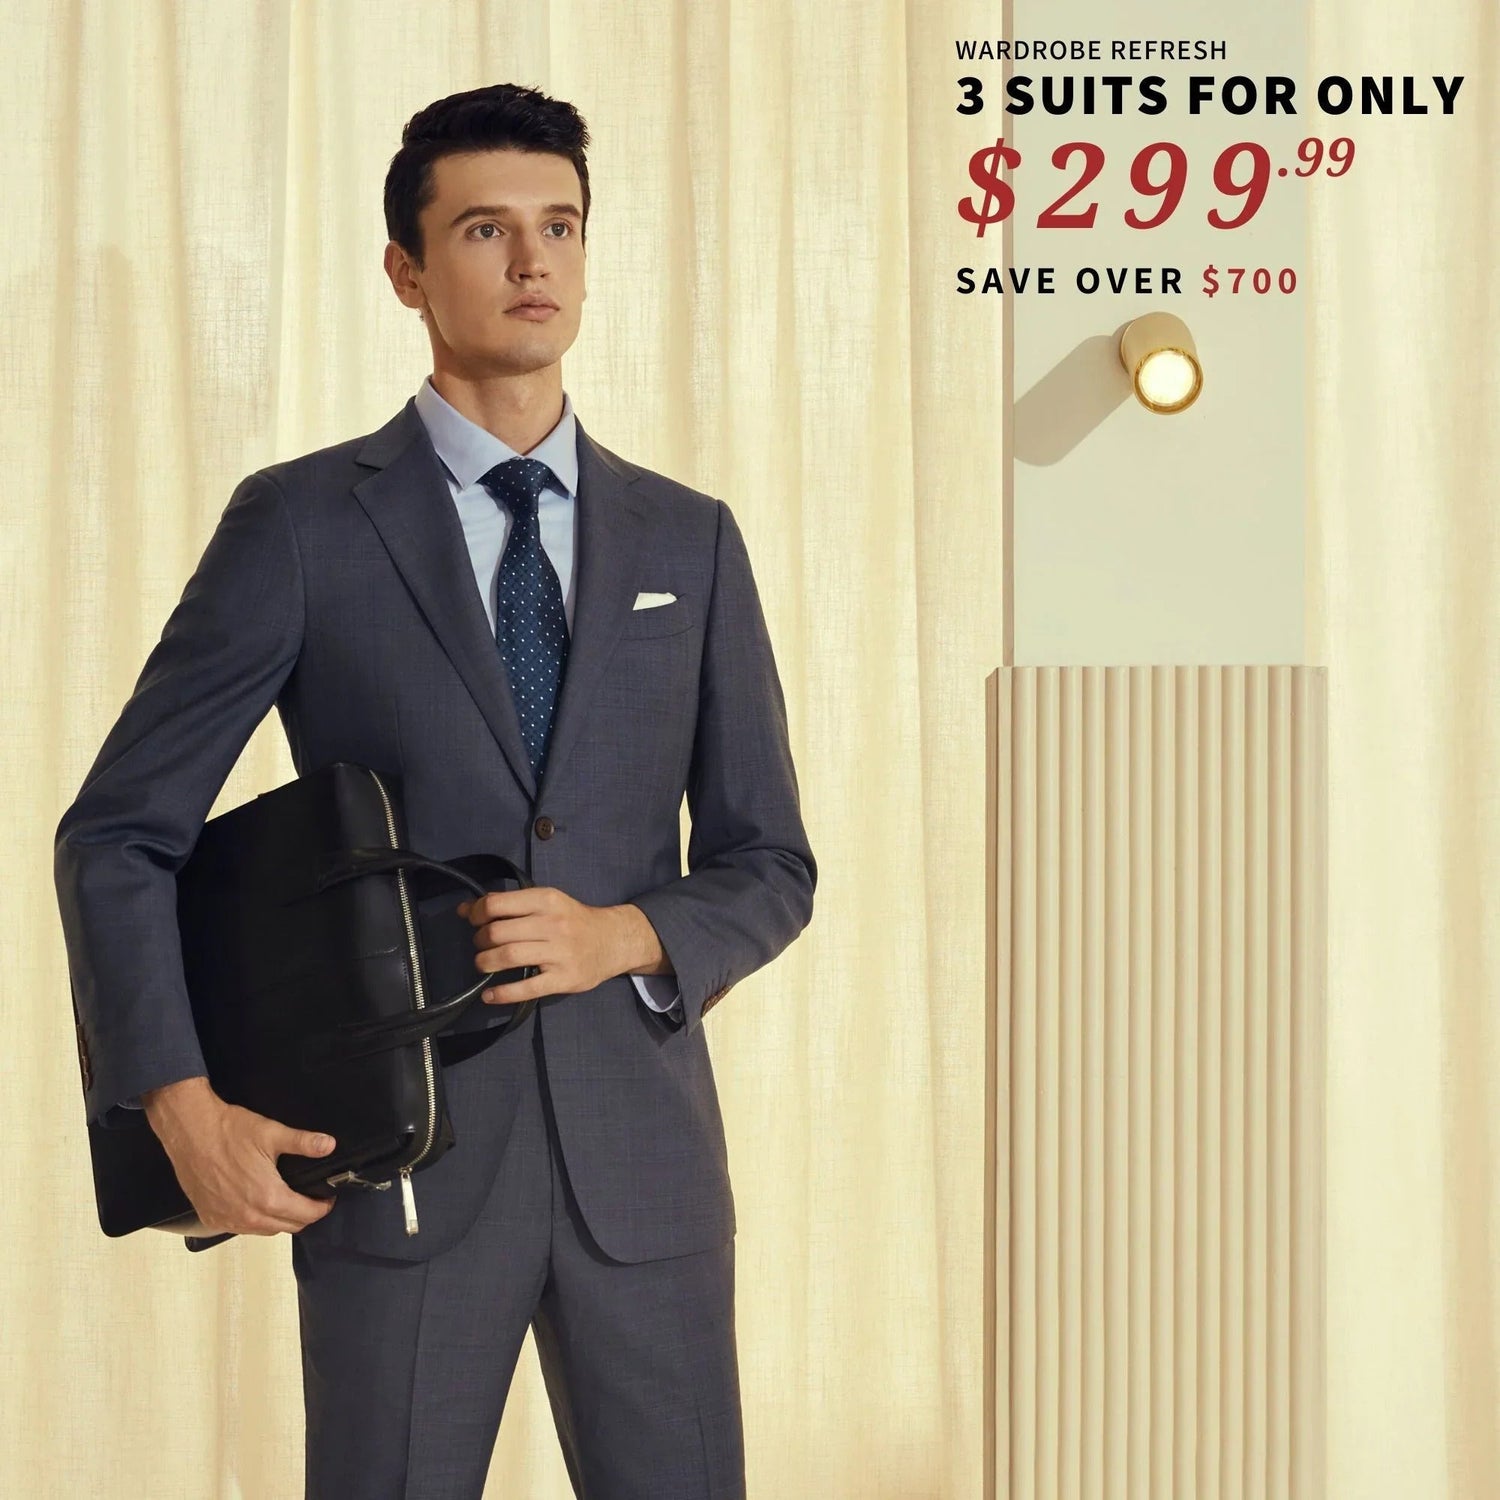 A man in a BYOB 3 Suits for $299 holding a briefcase.